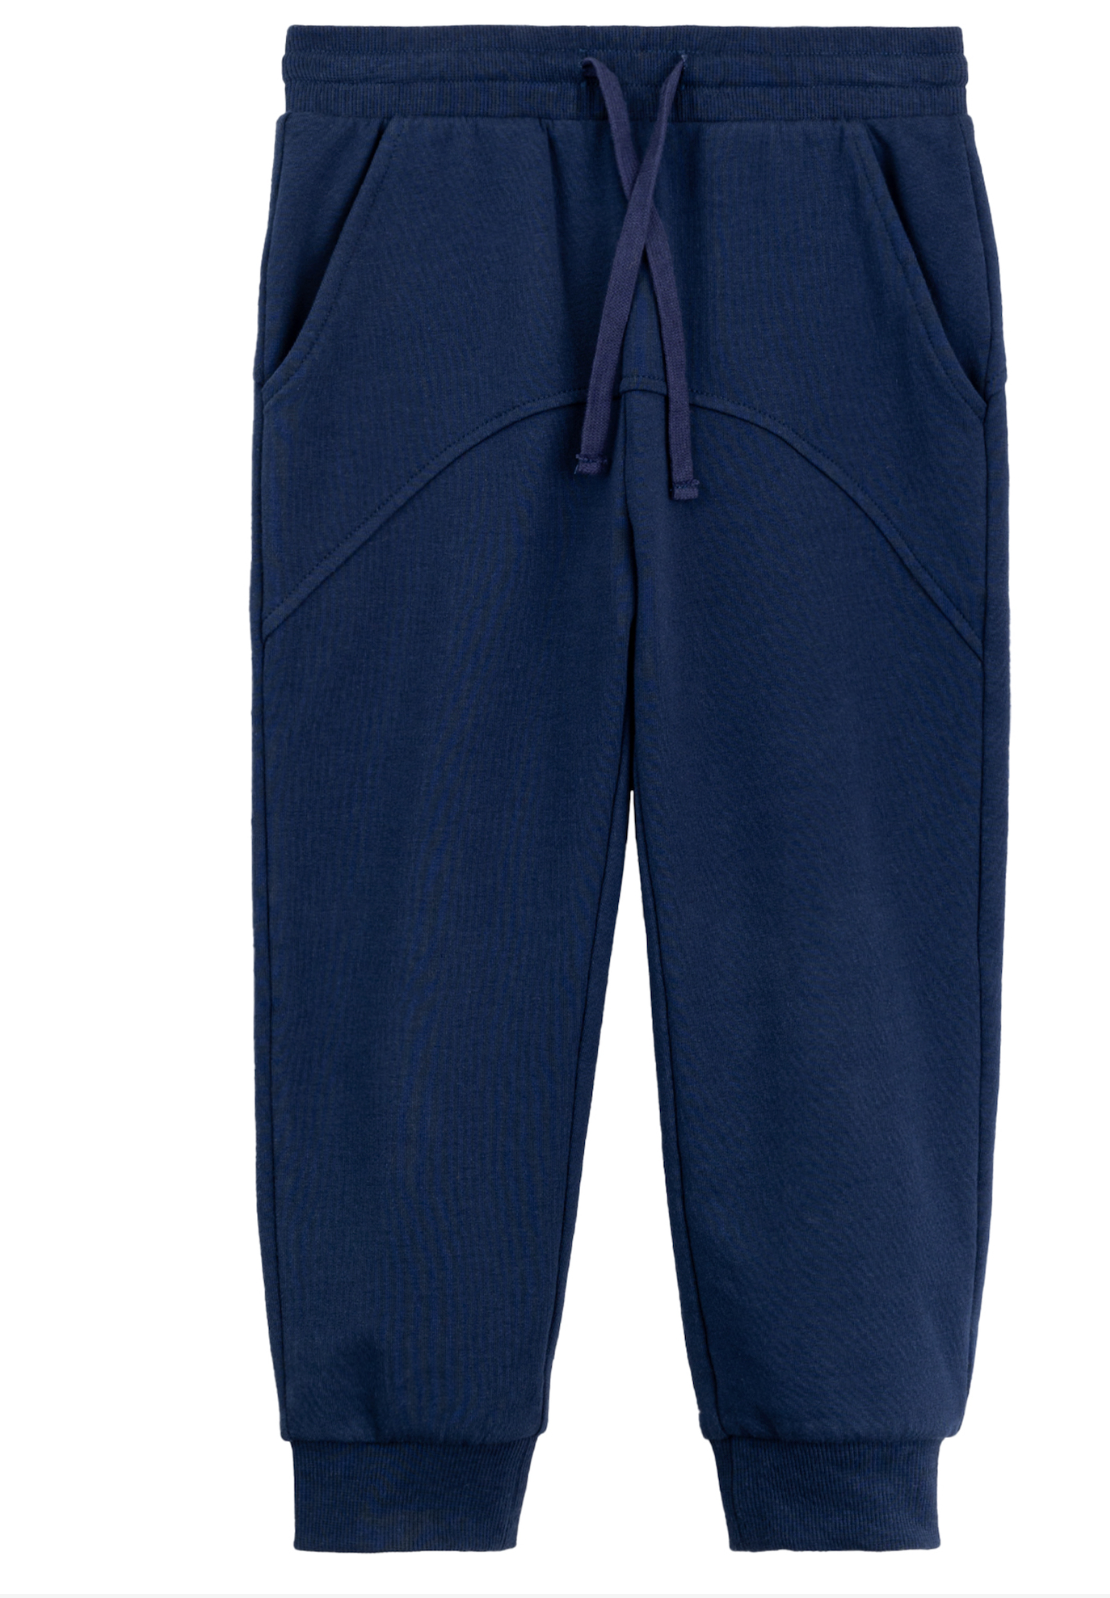 Miles The Label Navy Knit Pant